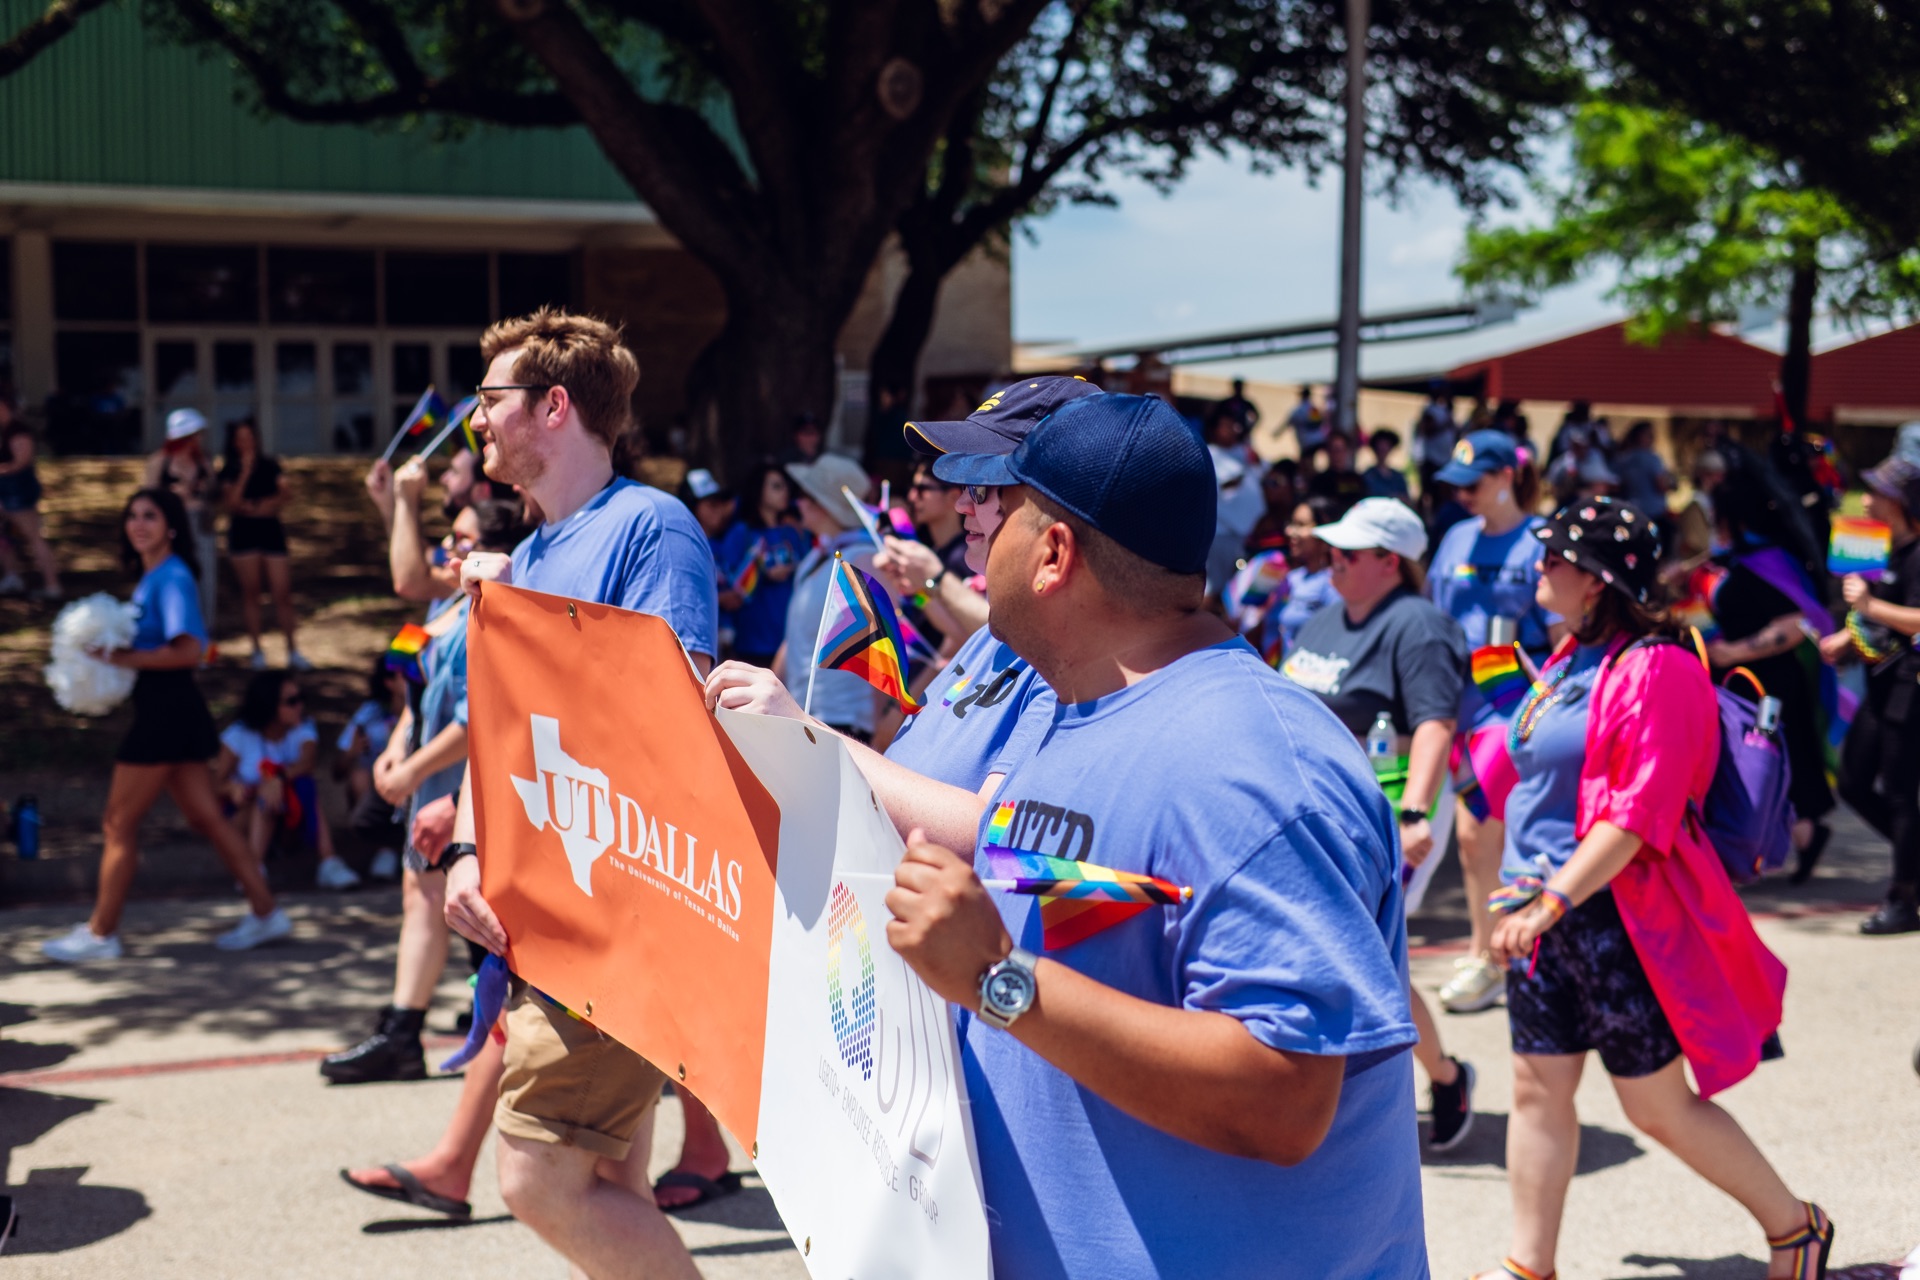 UTD Marchers Holding a Banner at the Dallas Pride Parade